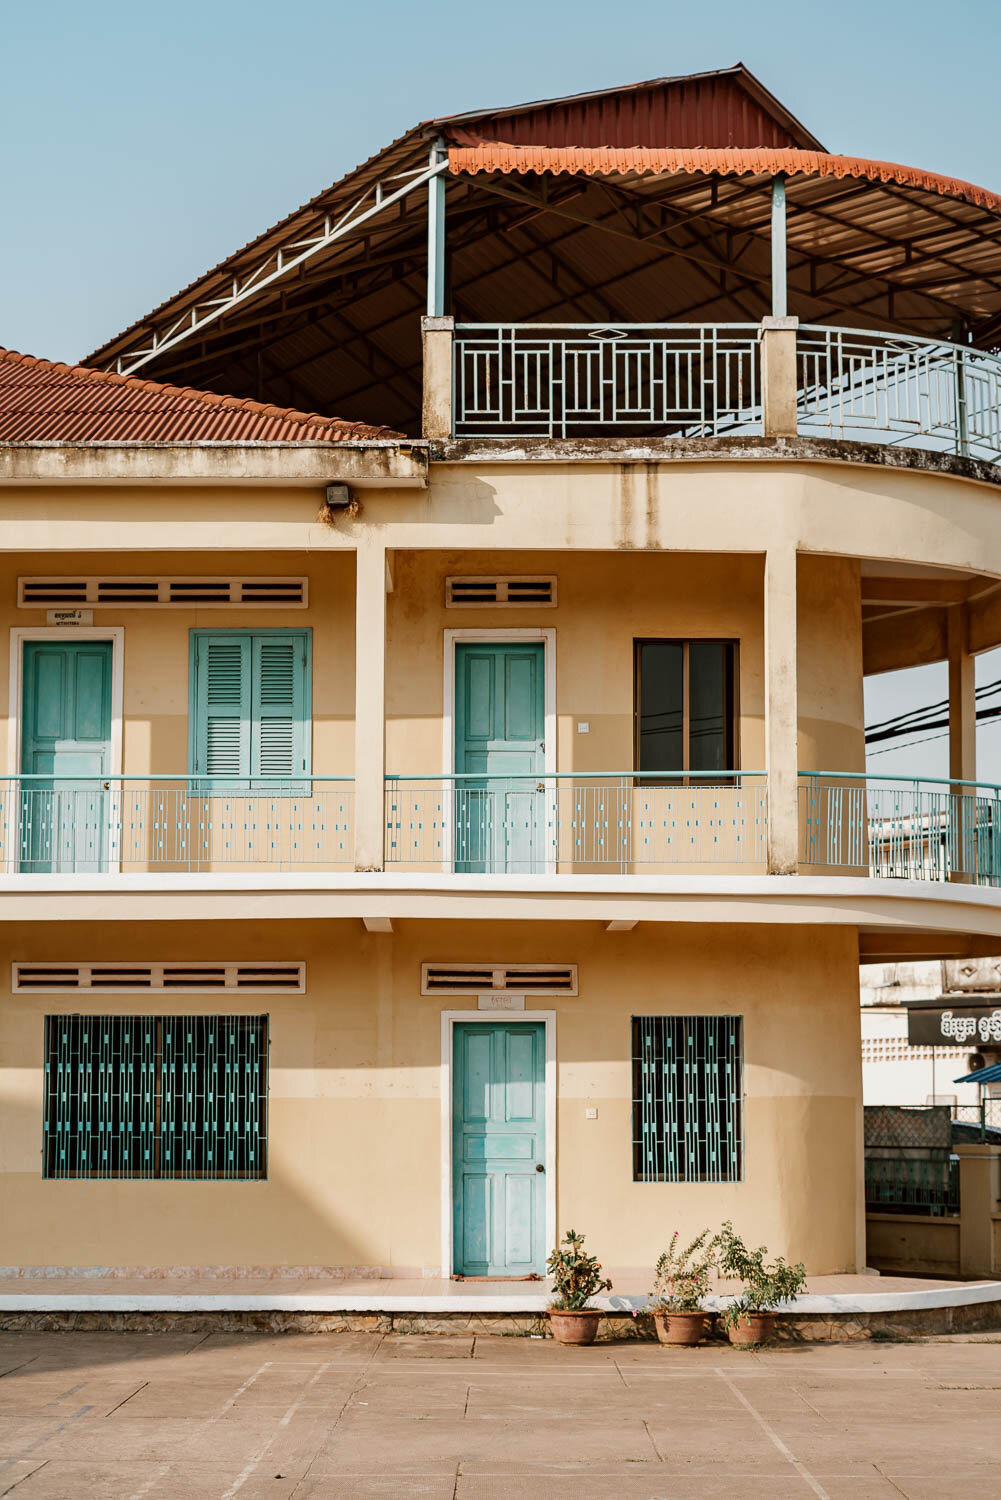 Things to do in Kampot - Explore the cool architecture.